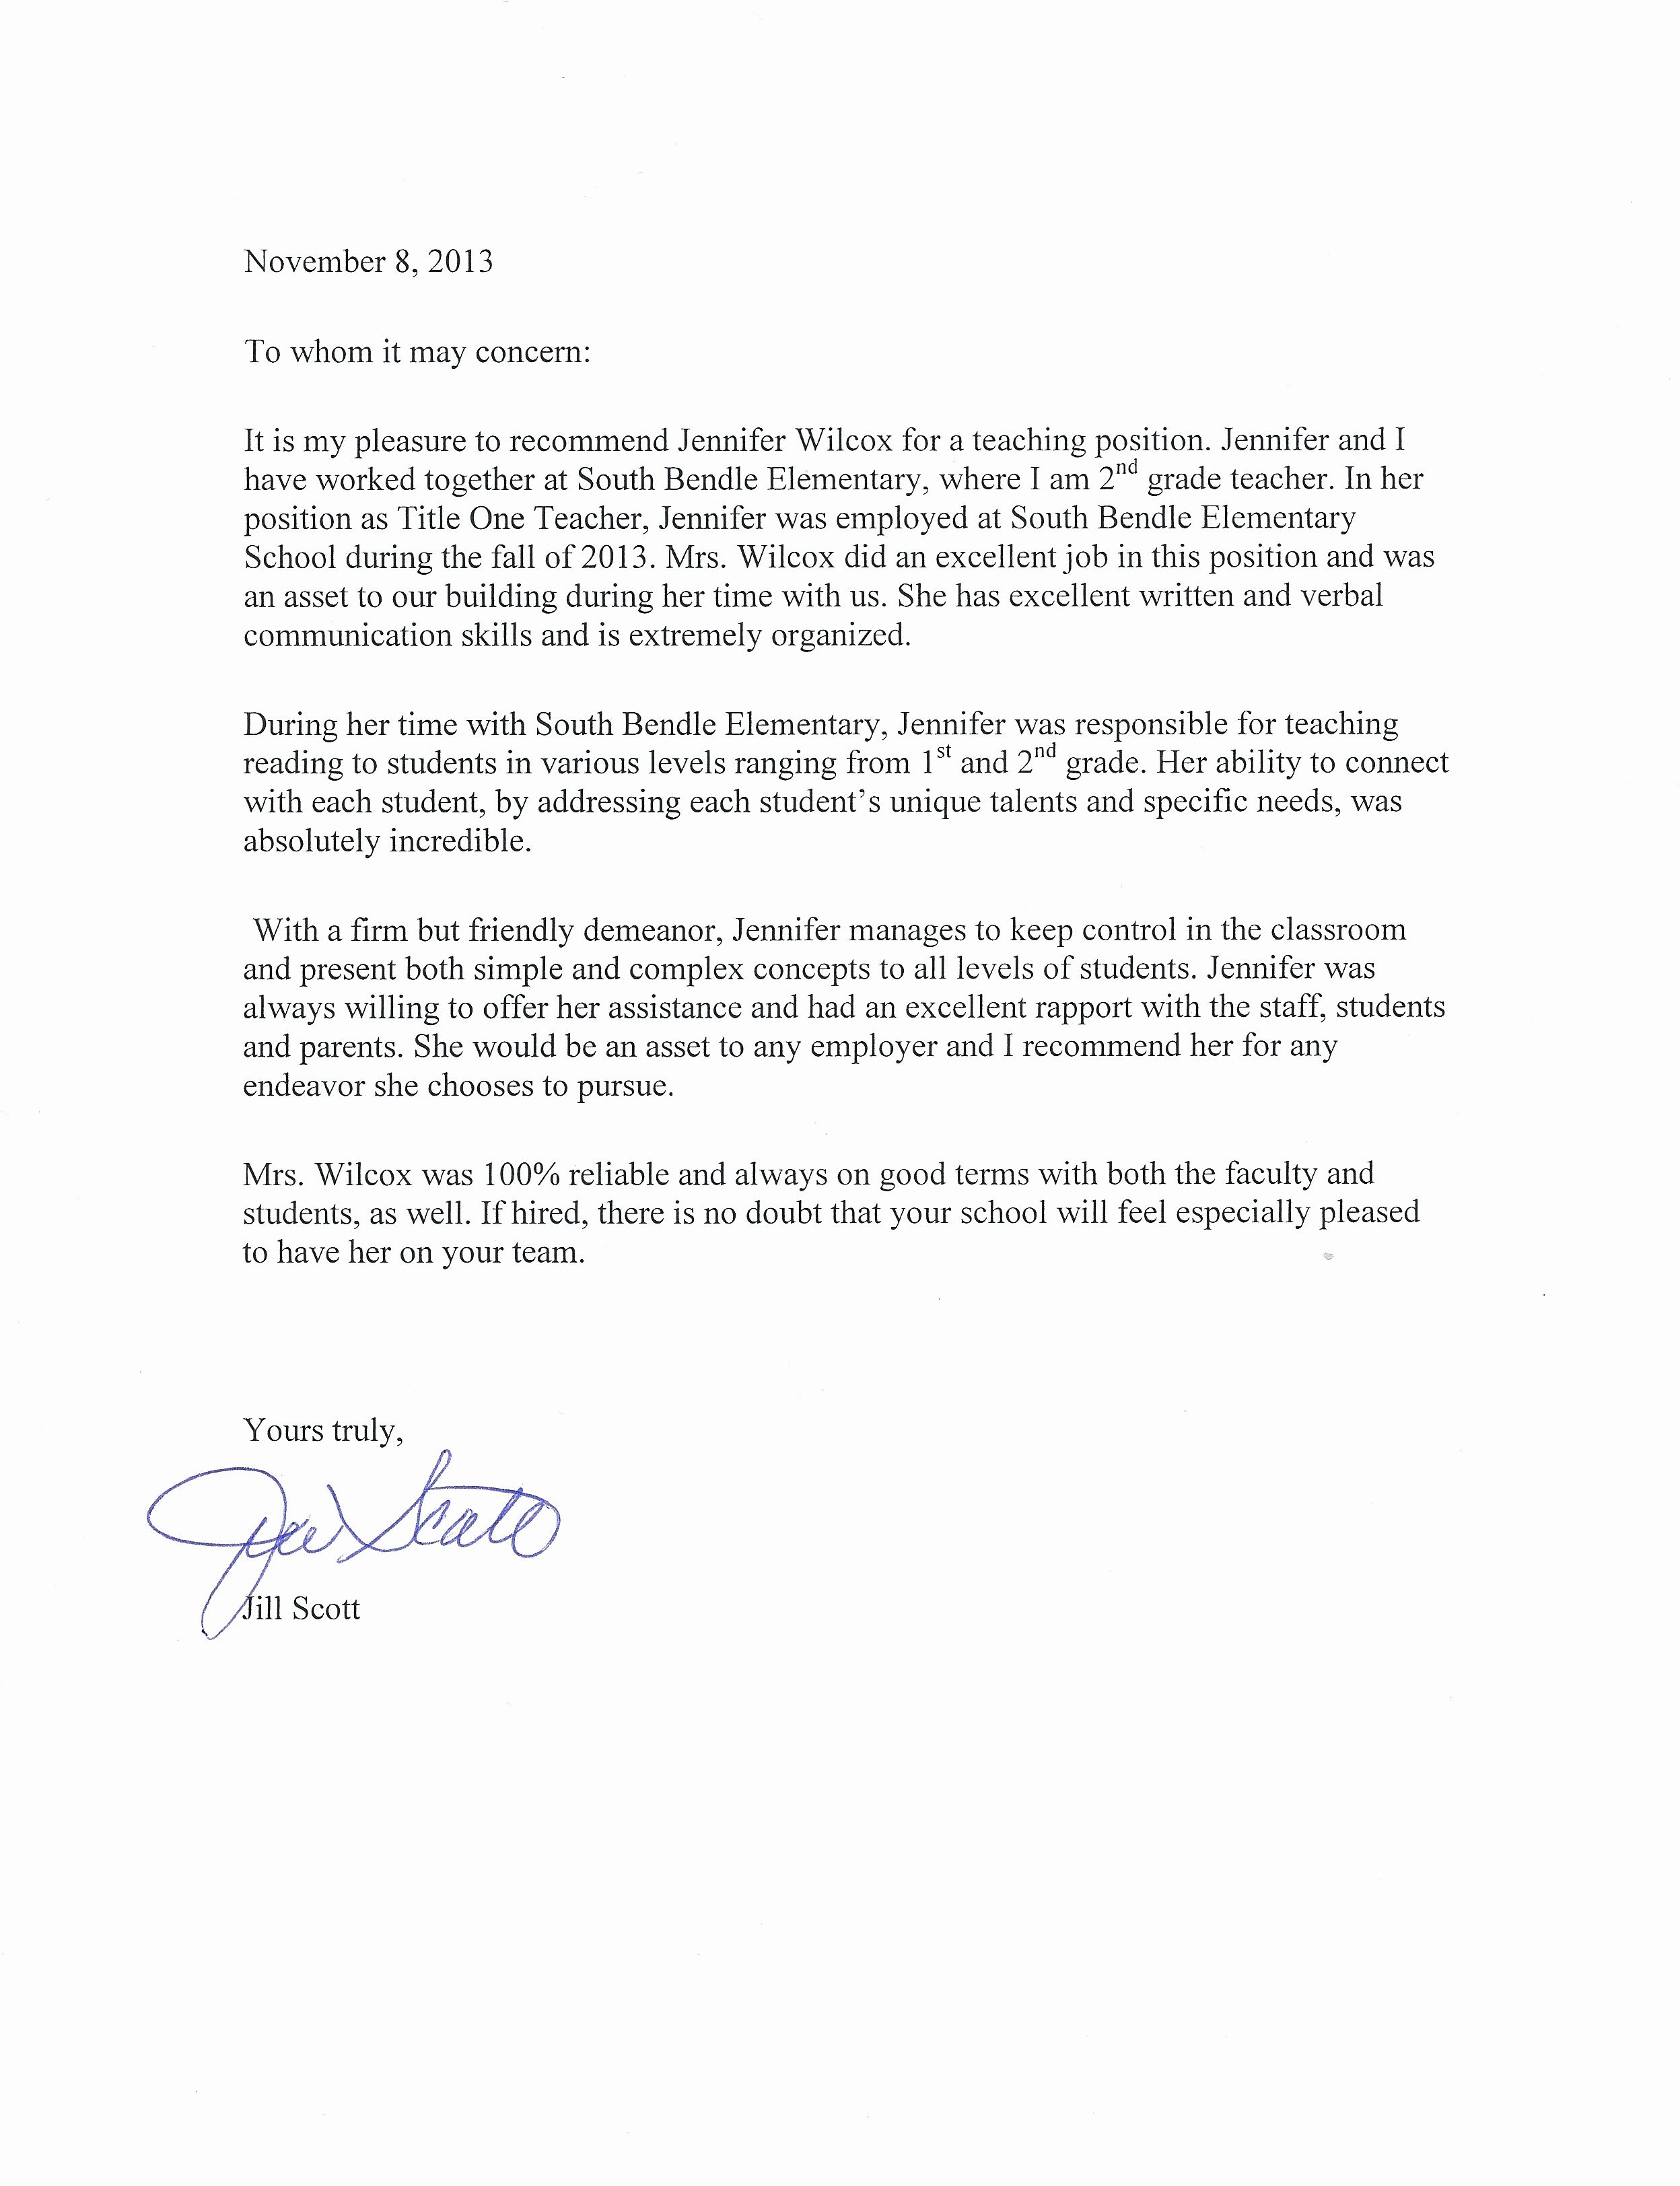 Letter Of Recommendation for Principalship Fresh Re Mendations